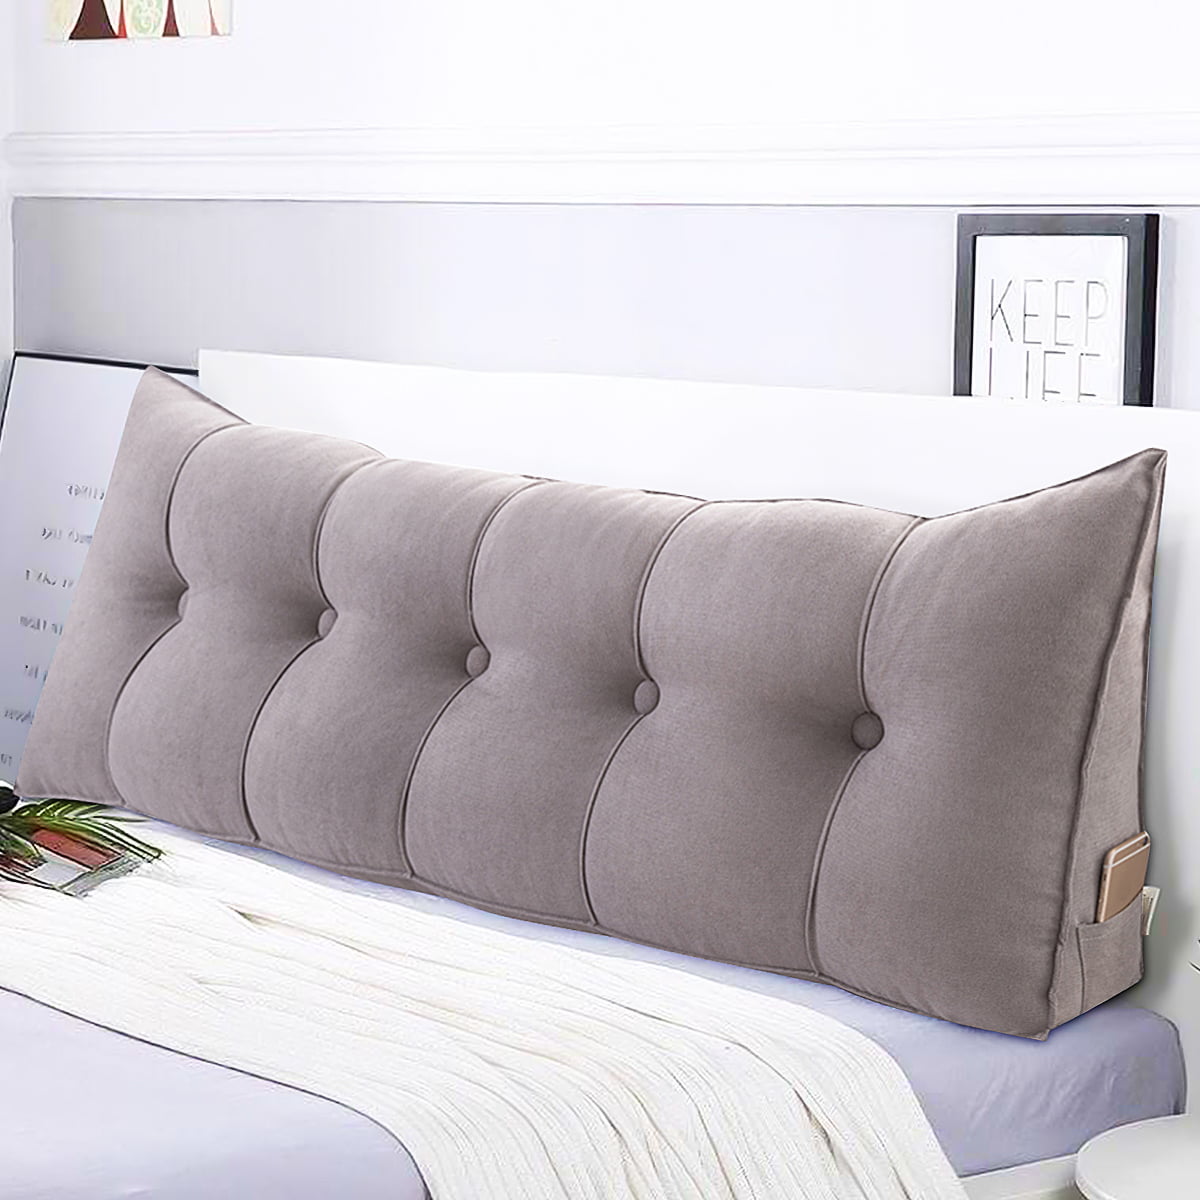 Back Bolster Triangular Wedge Reading Pillow Soft Headboard For Daybed Cushion 